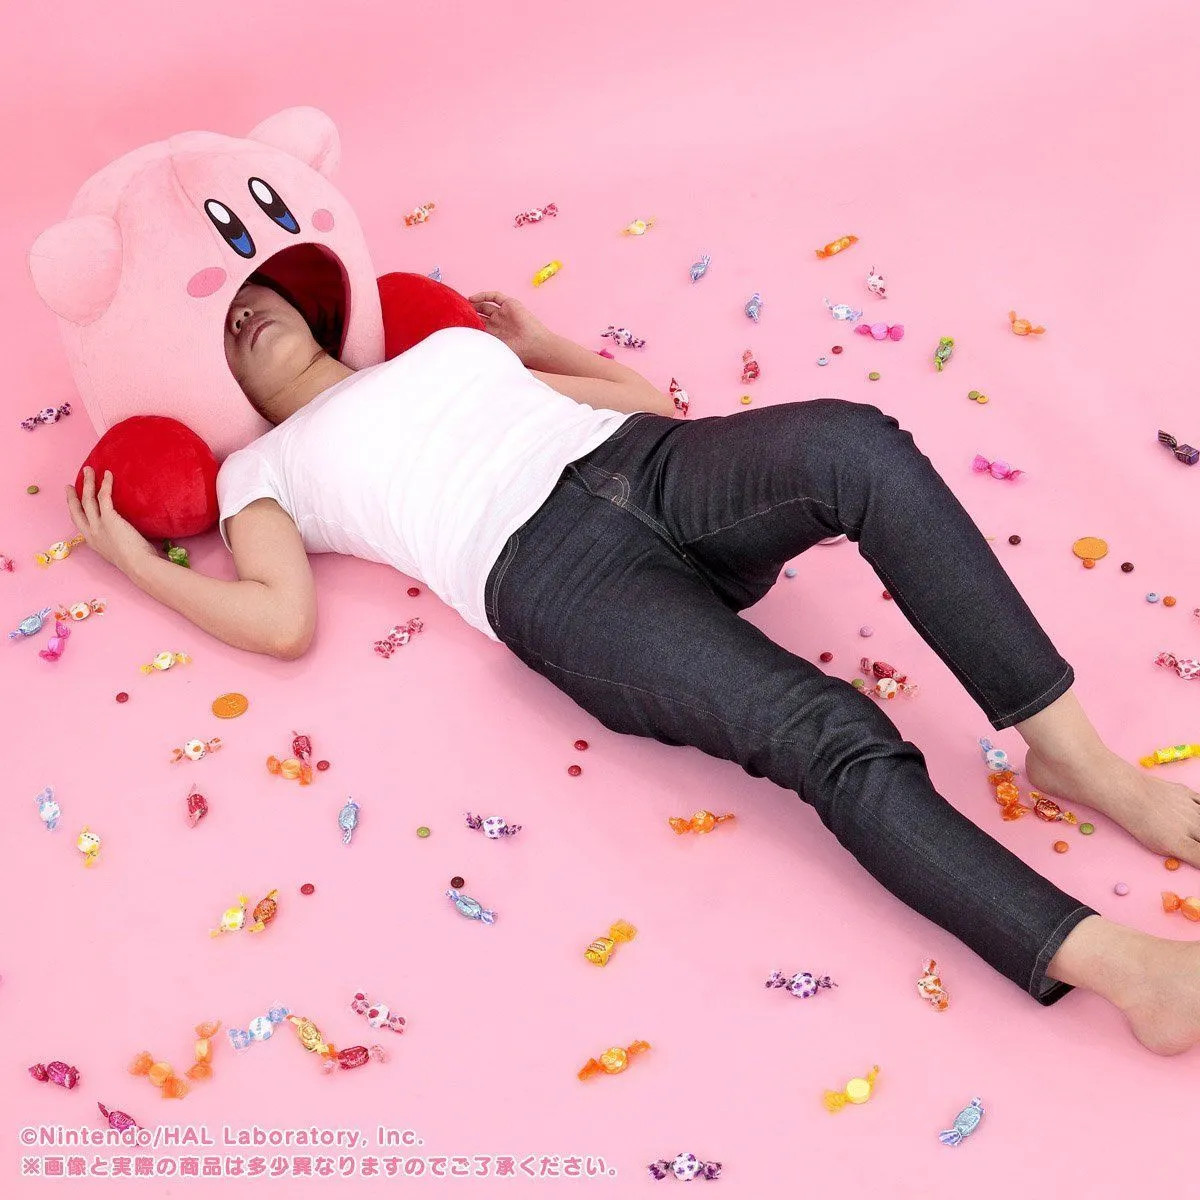 This Giant Kirby Pillow Is Perfect for Taking the Ultimate Nap